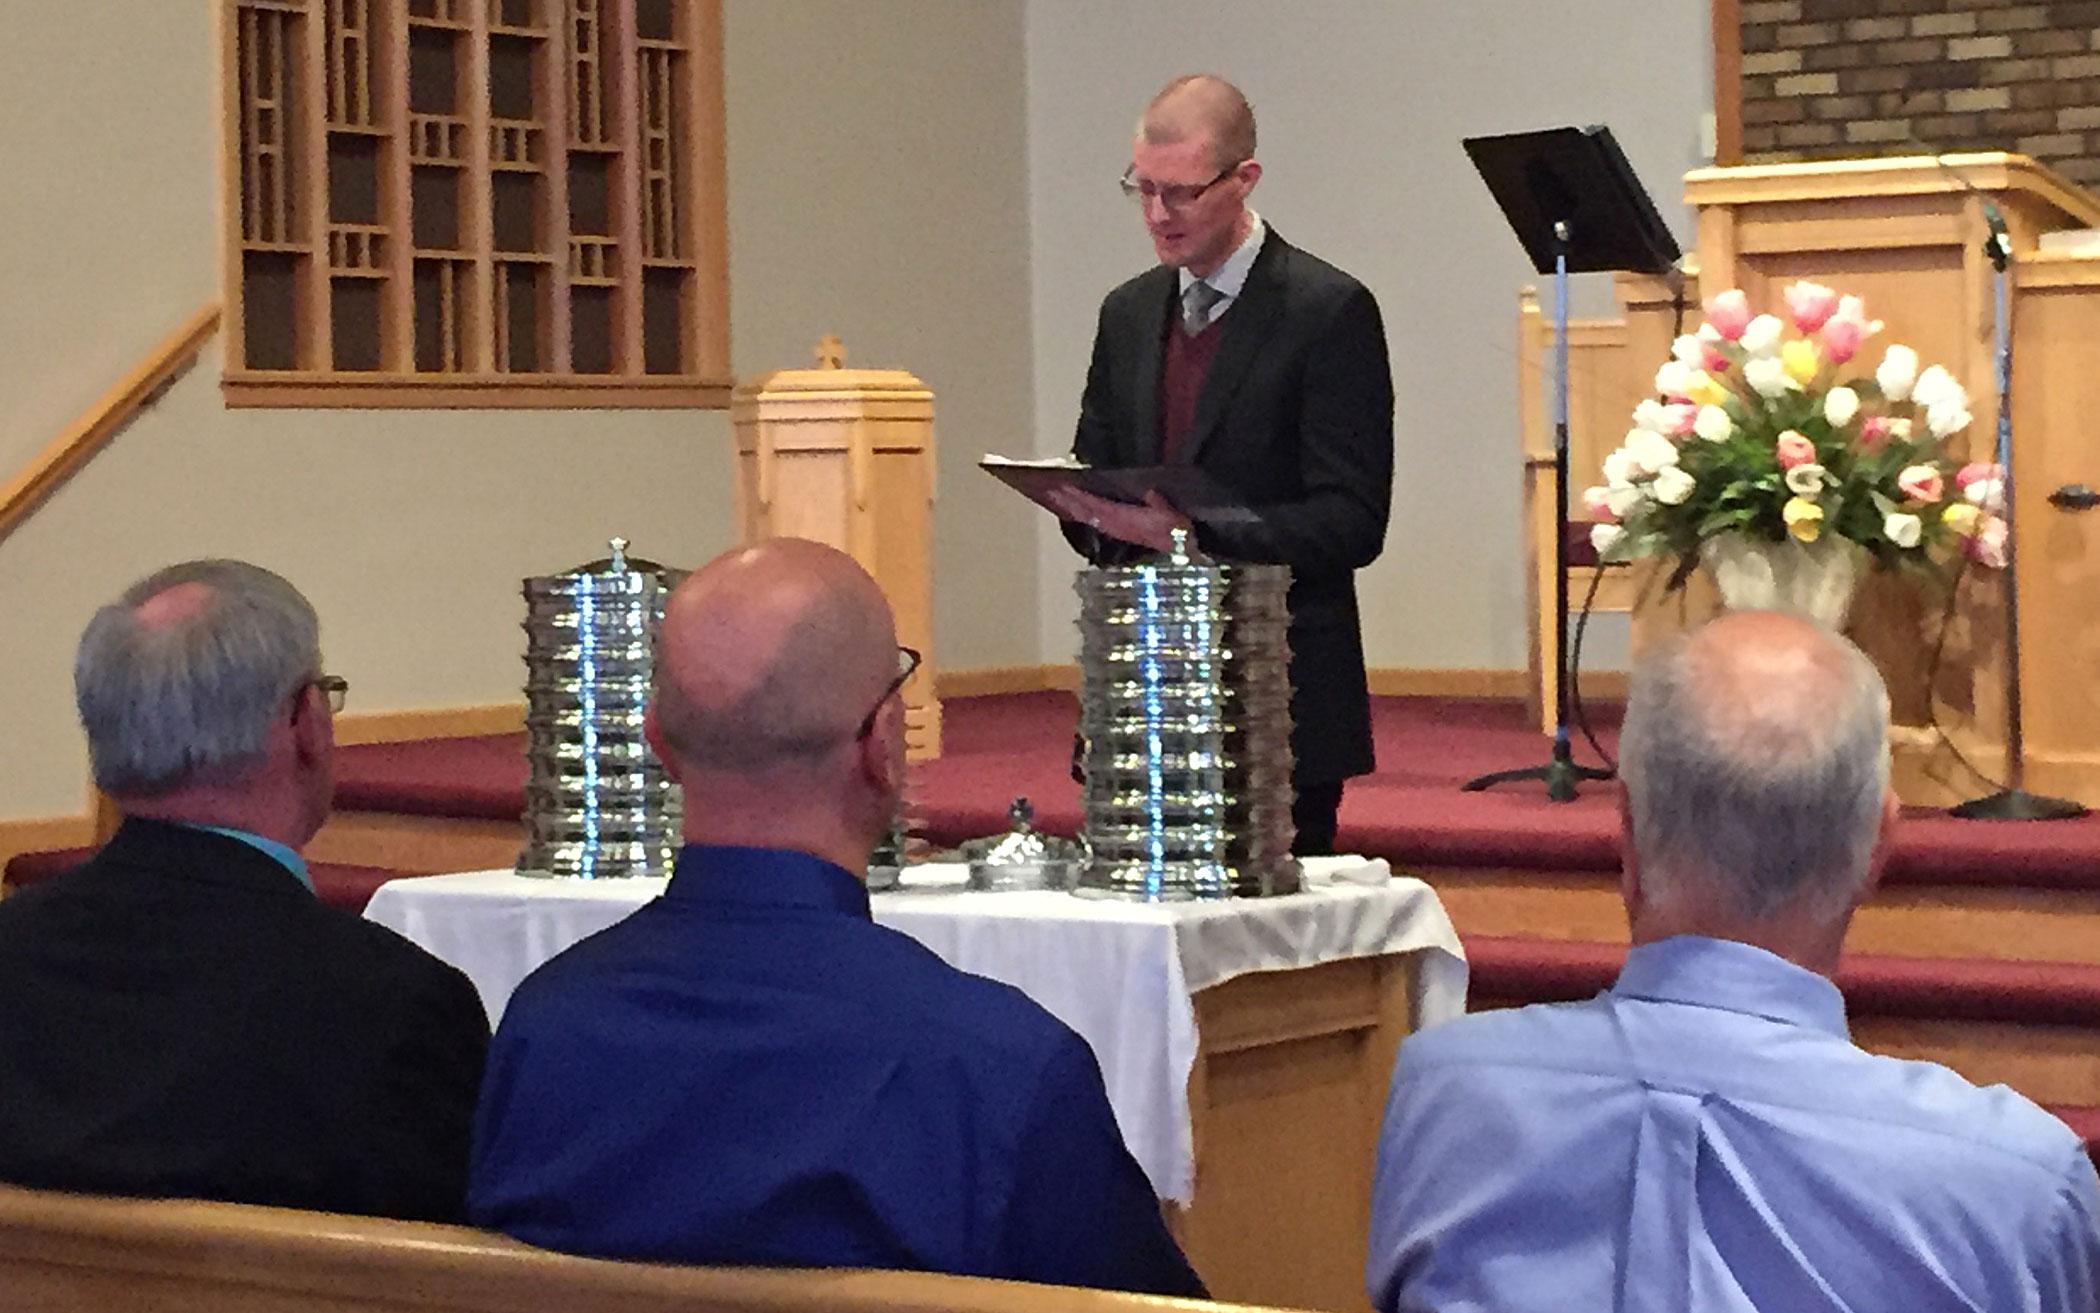 Pastor Scott Muilenberg administered the sacrament of the Lord’s Supper at the commemoration service.